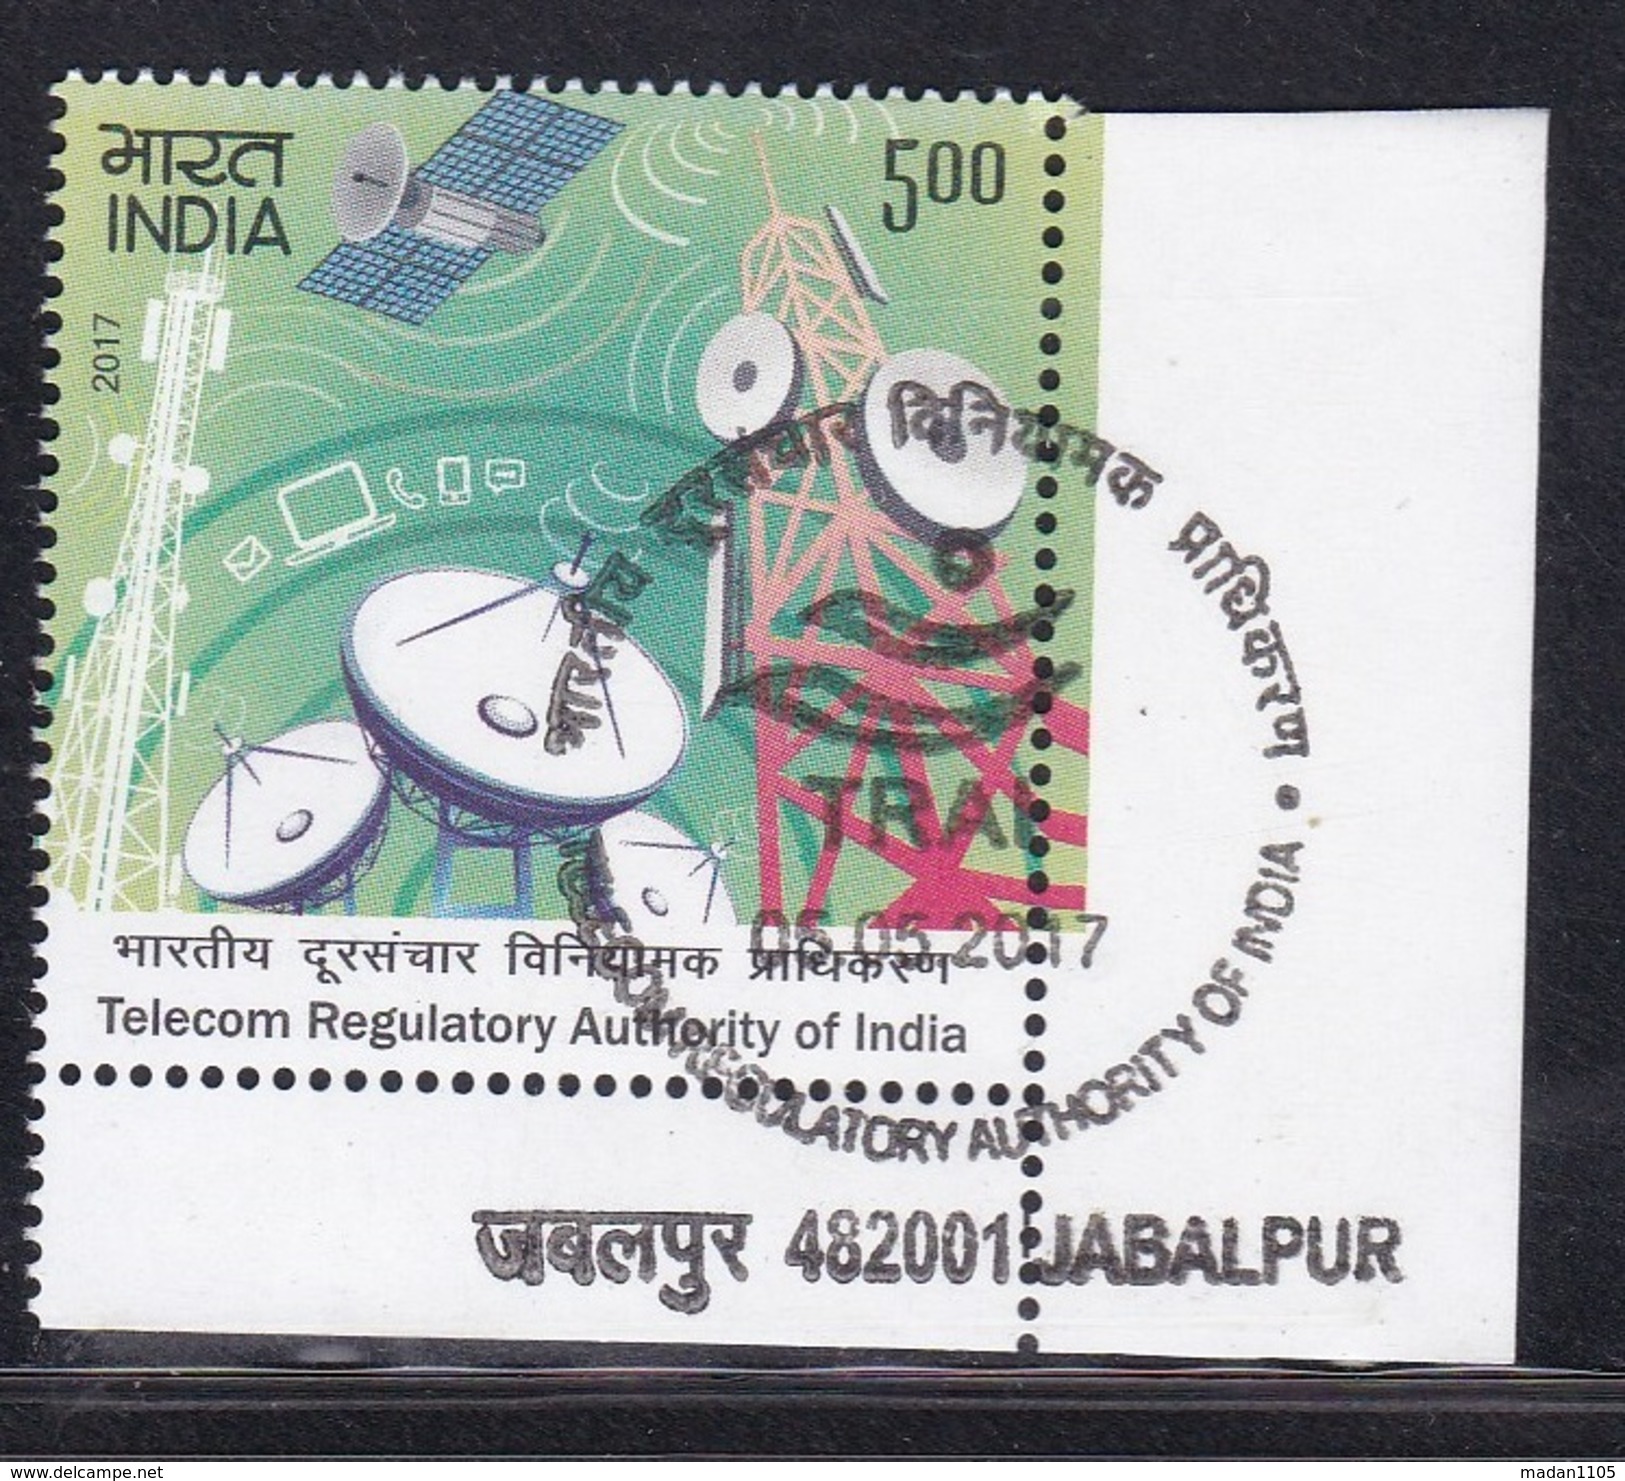 INDIA, 2017, FIRST DAY CANCELLED,  TELECOM REGULATORY AUTHORITY OF INDIA, (TRAI), Telecomminications, 1v, - Used Stamps